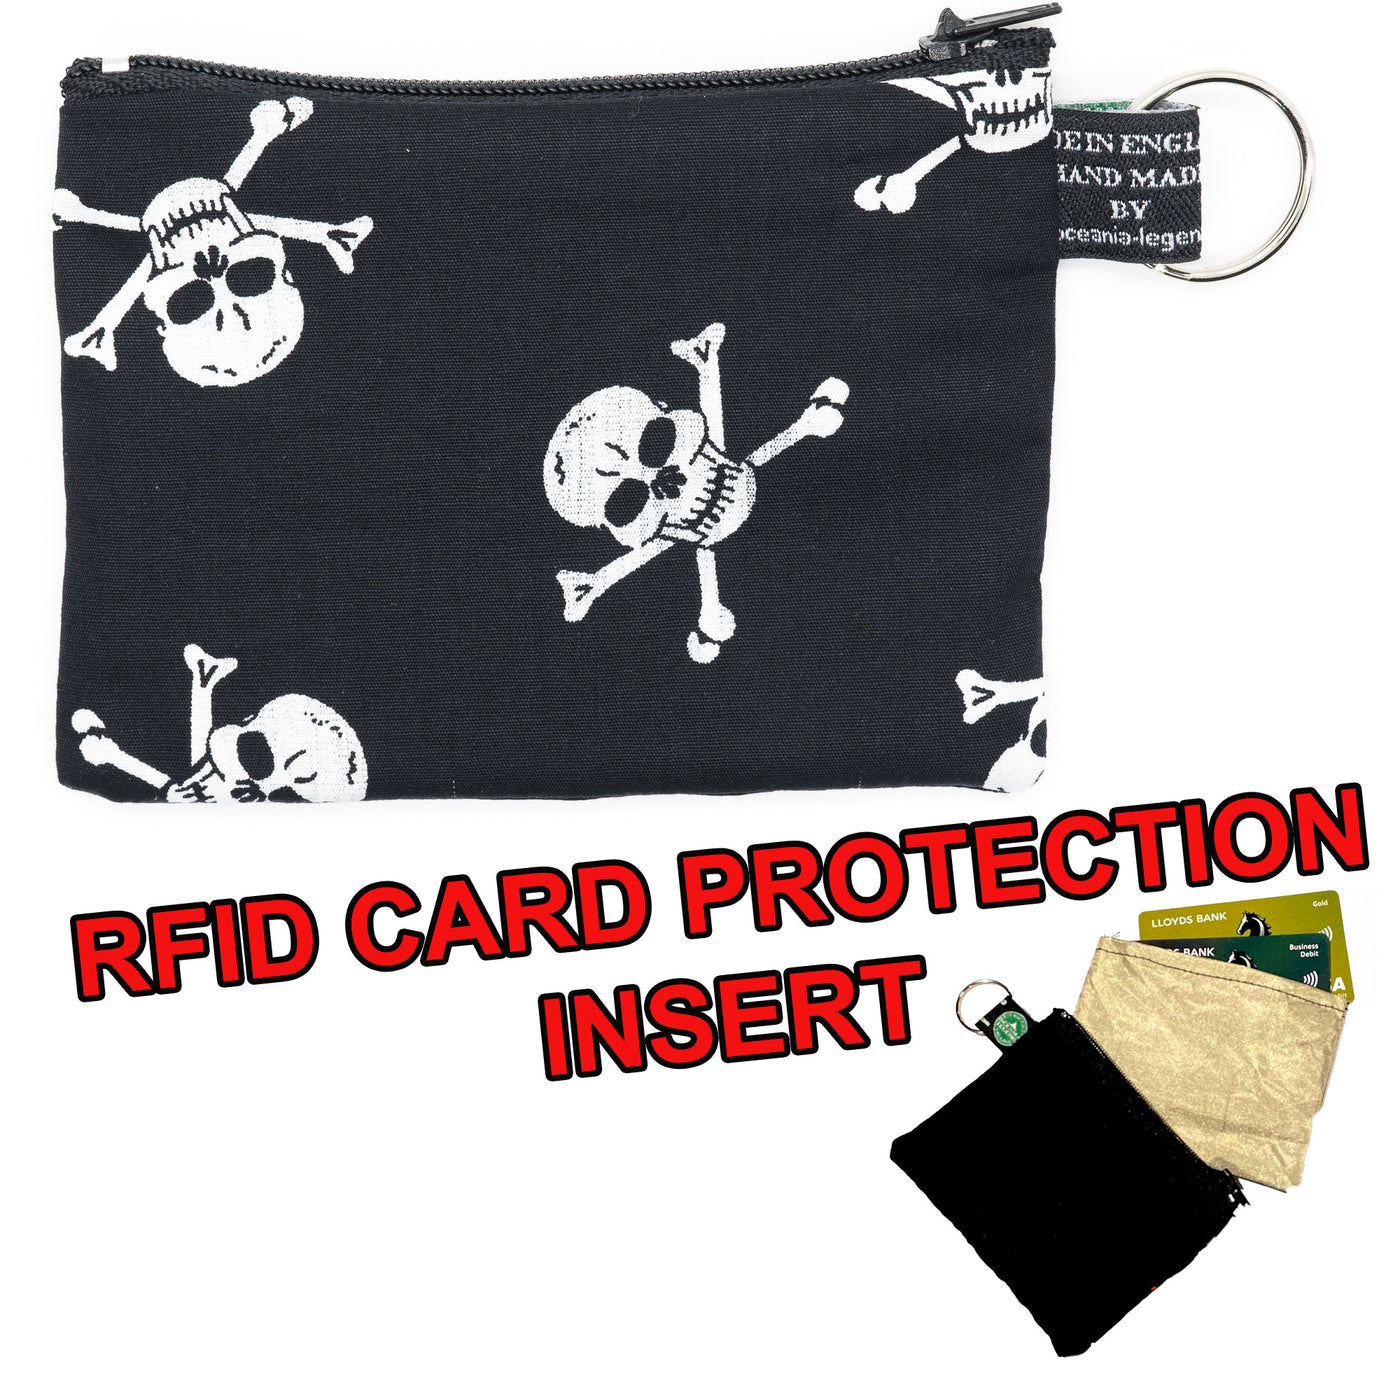 Skull & Crossbones Black & White cotton zipped purse for coins & cards with RFID protection